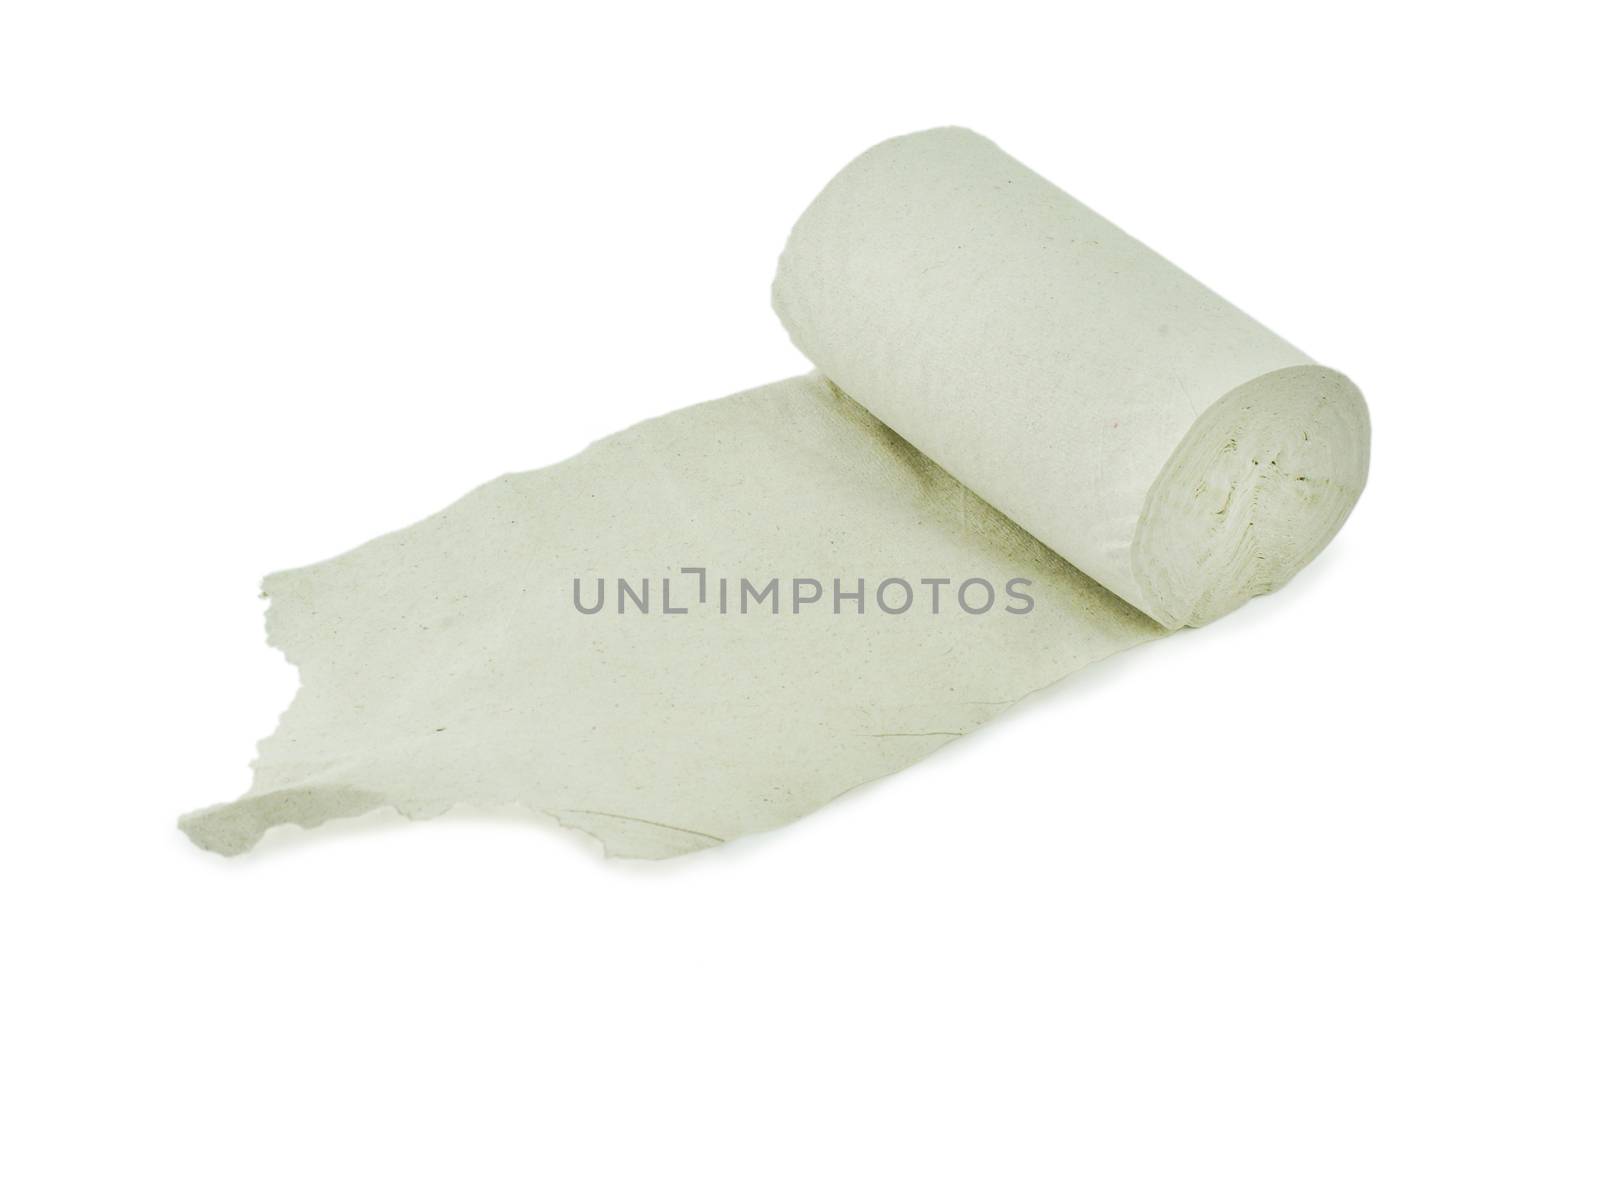 Simple toilet paper on white background. For your commercial and editorial use.